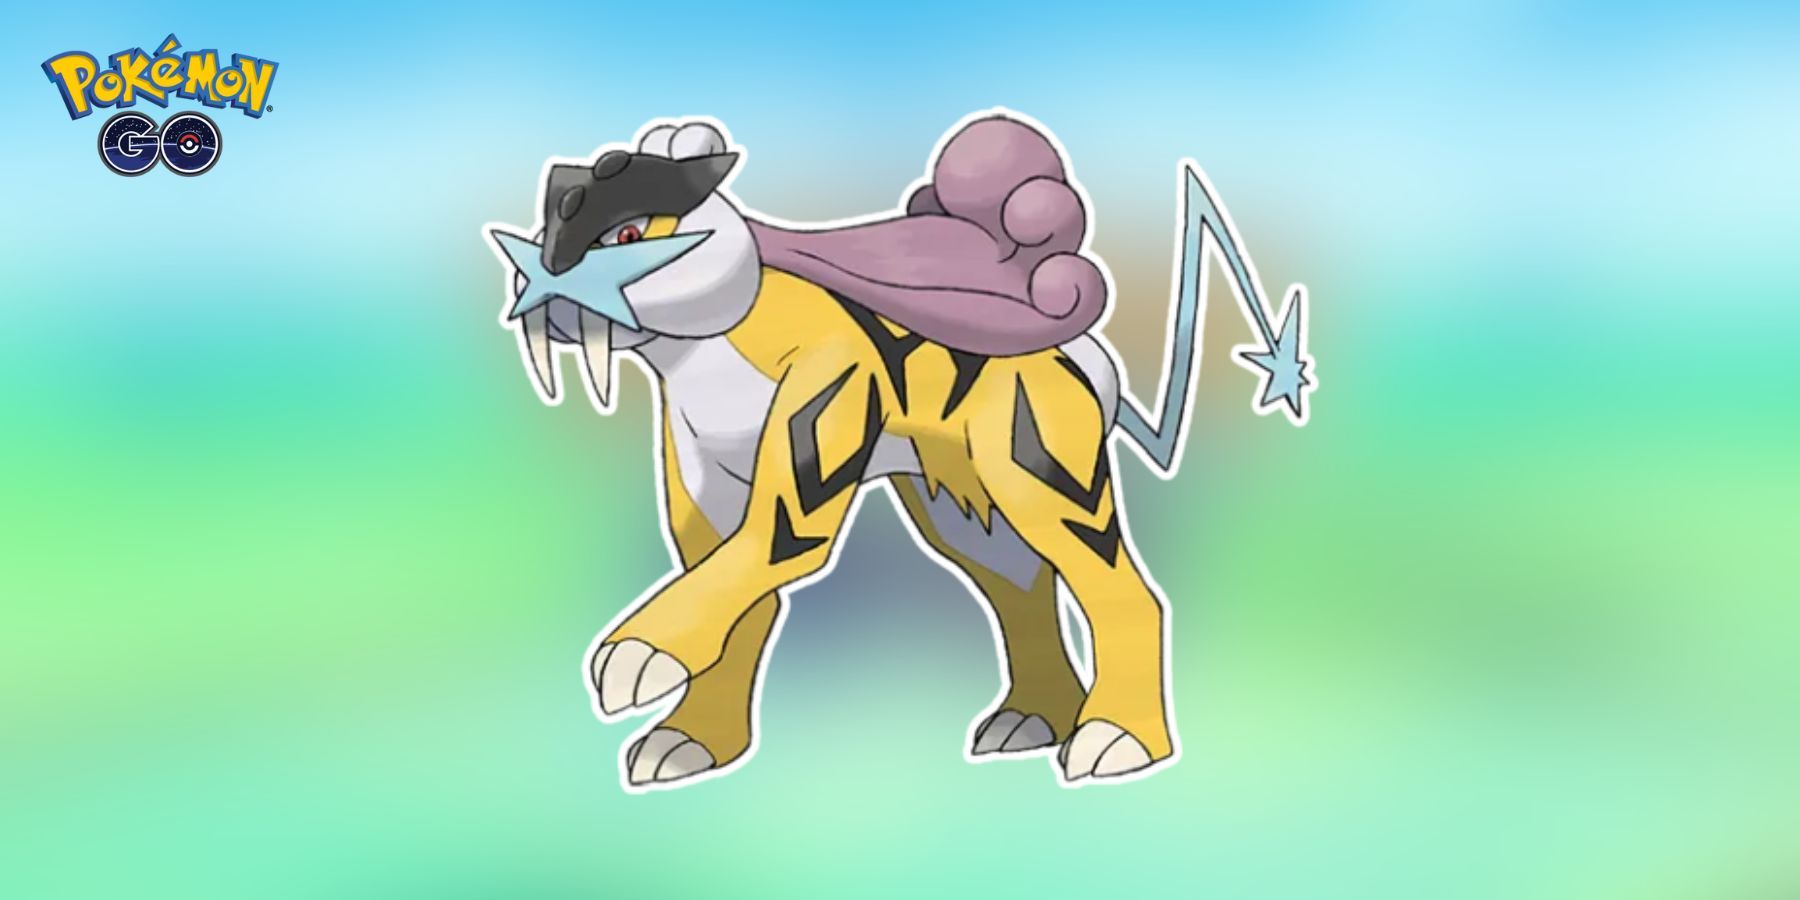 Pokemon Go Raikou, Entei and Suicune Raid news, counters and weakness, Gaming, Entertainment